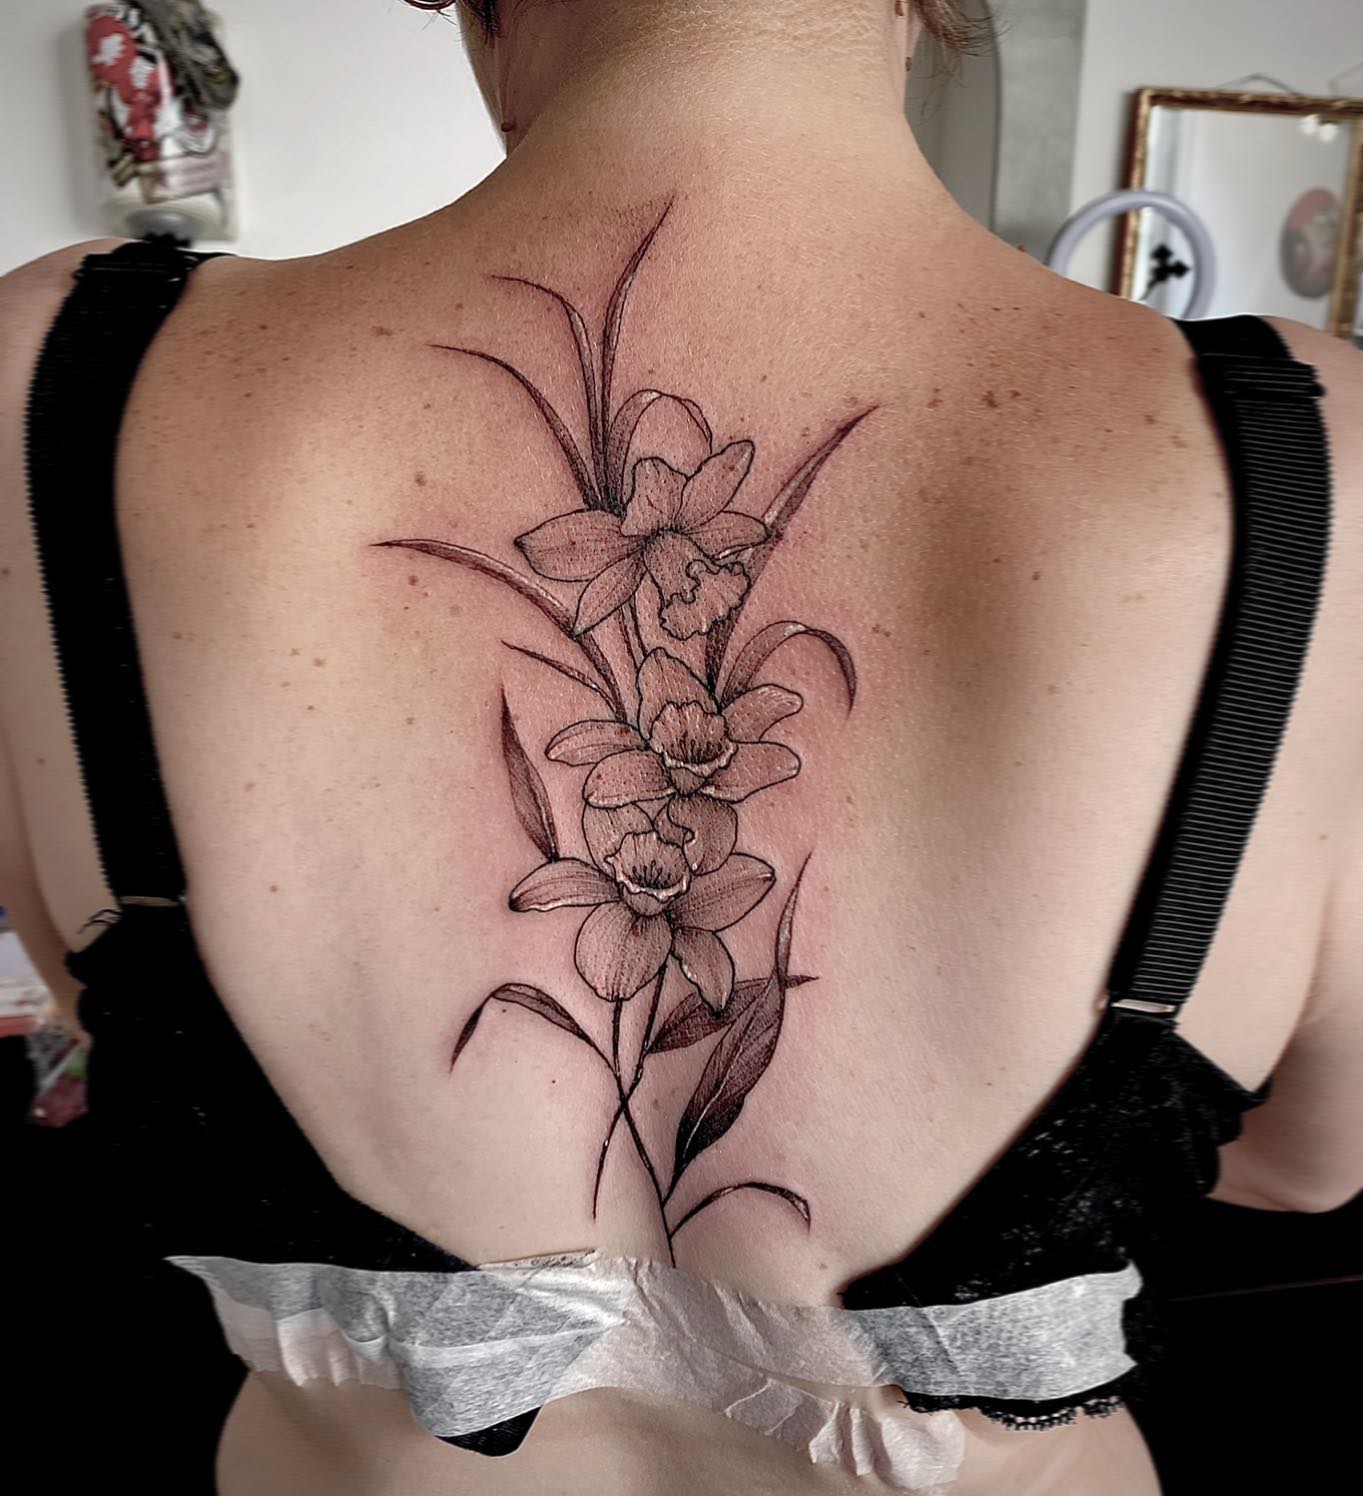 How much do you love flowers from 1-10? The greater the love, the prettier the tattoo will look on your back, along with a ton of cool different options.